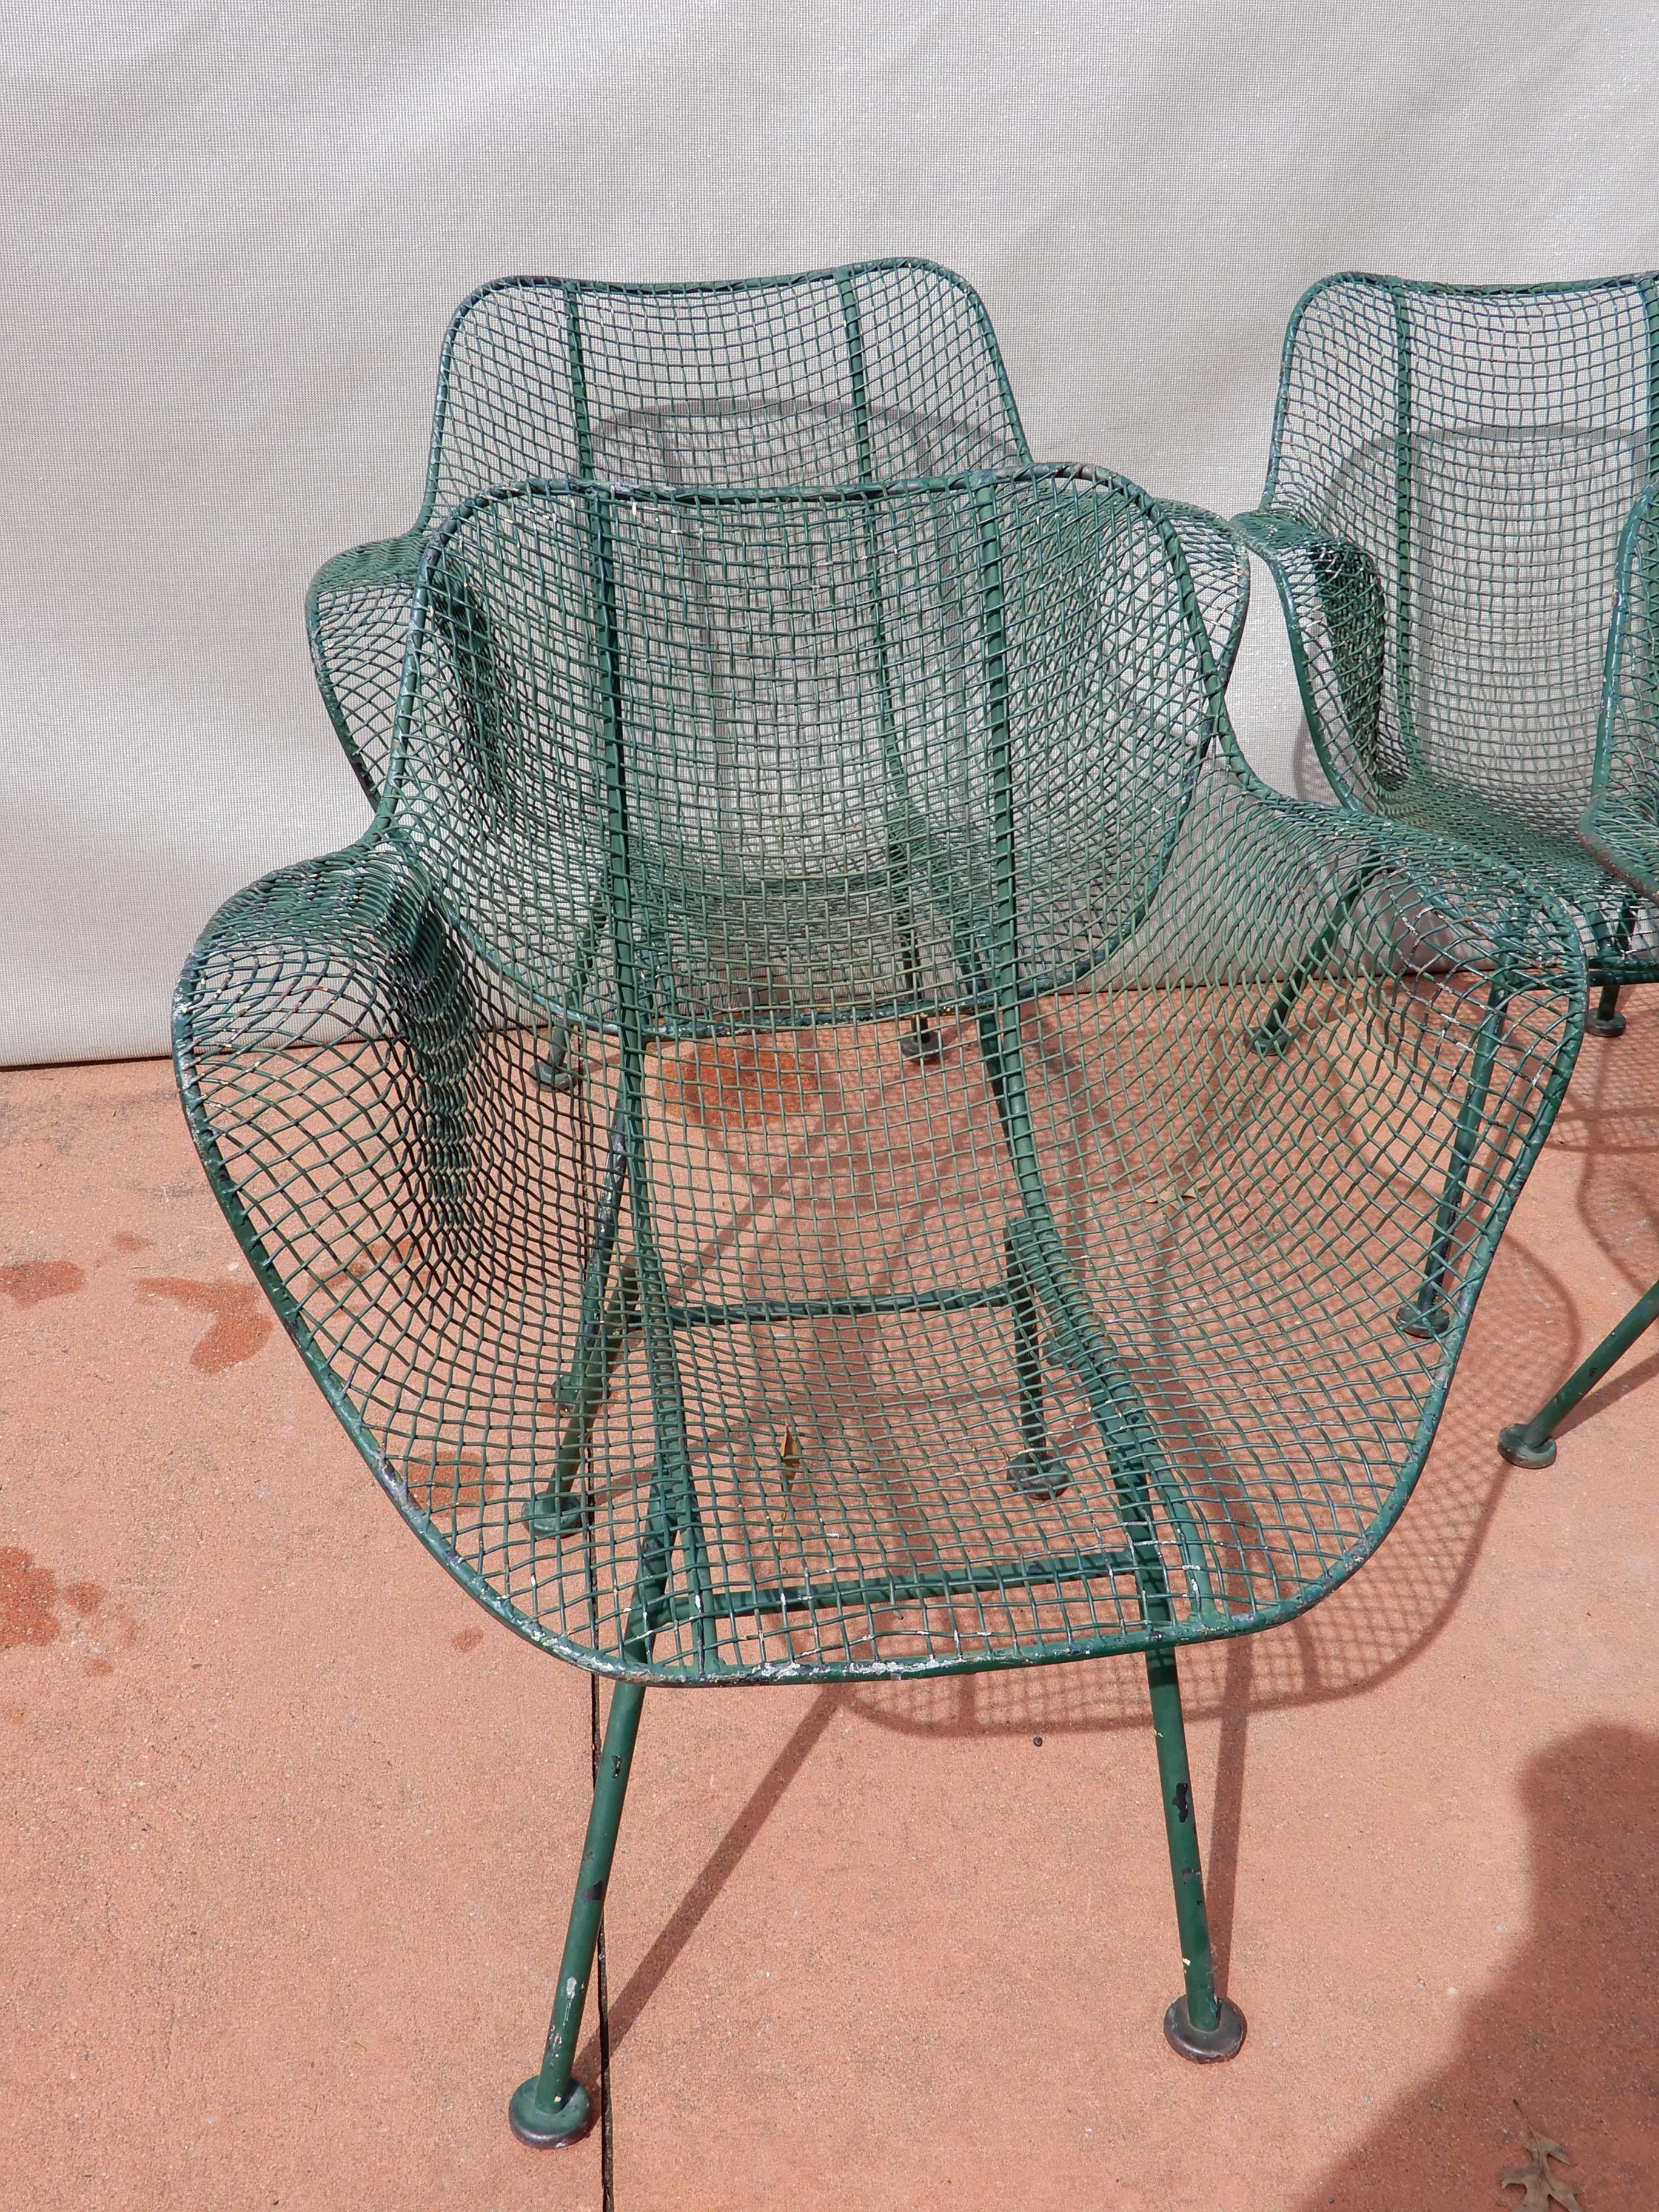 A set of four Russell Woodard sculptura wrought iron and mesh chairs.
These chairs are shown in an ad by Woodard which unfortunately was too small to upload here. The chairs are in a warm light greenish color which is an old painted finish. They are